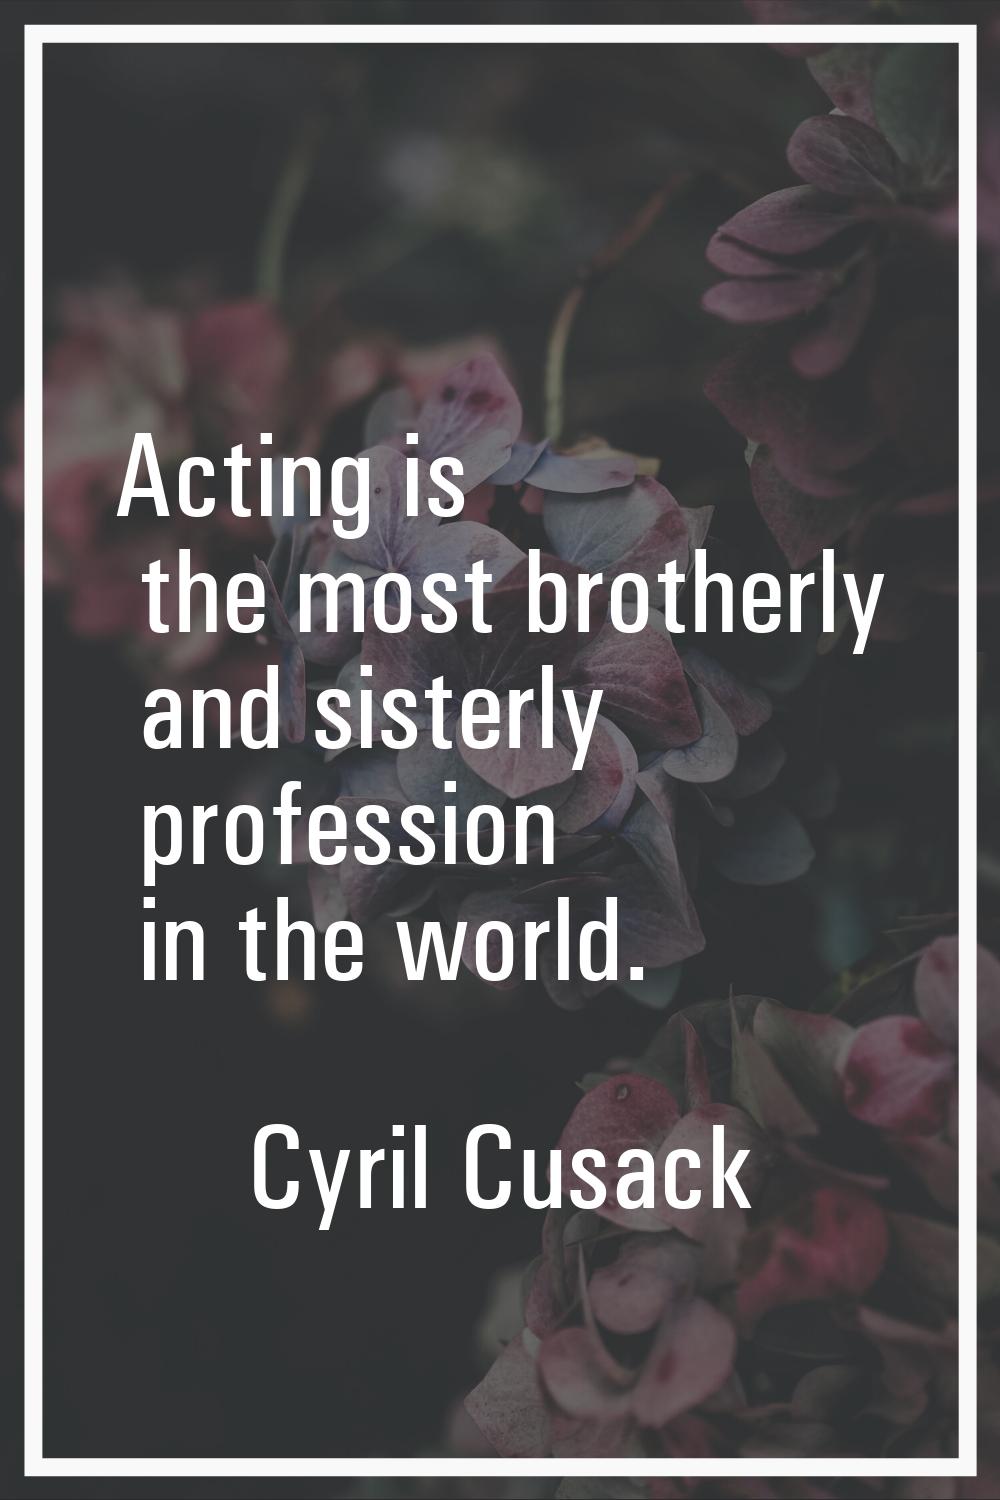 Acting is the most brotherly and sisterly profession in the world.